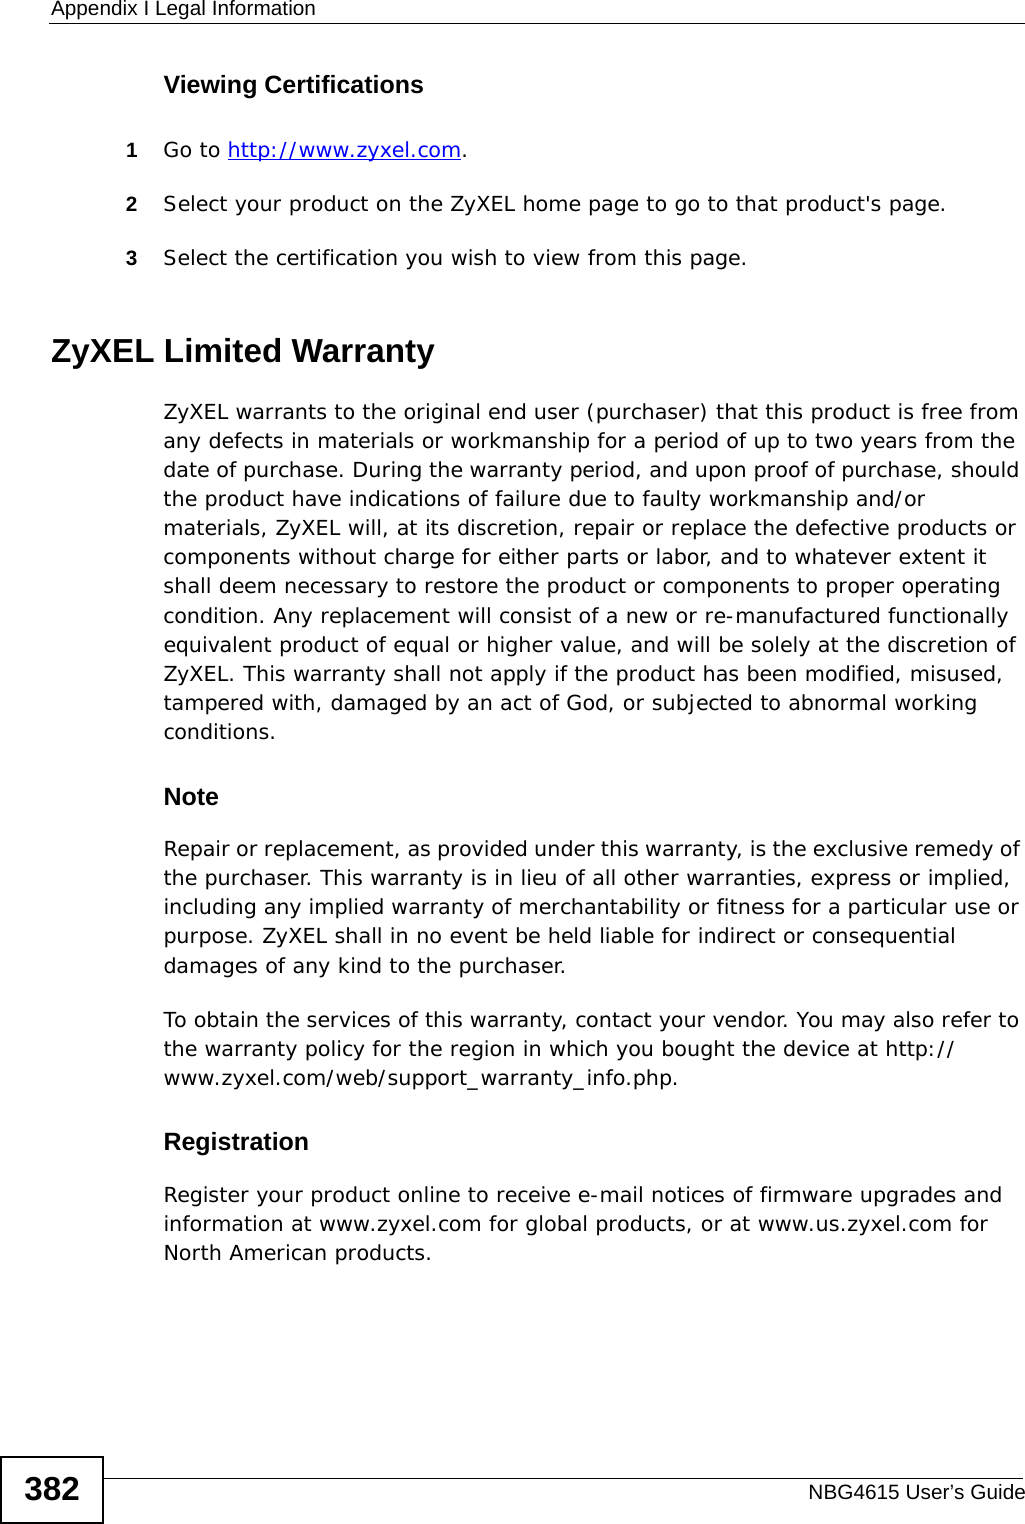 Appendix I Legal InformationNBG4615 User’s Guide382Viewing Certifications1Go to http://www.zyxel.com.2Select your product on the ZyXEL home page to go to that product&apos;s page.3Select the certification you wish to view from this page.ZyXEL Limited WarrantyZyXEL warrants to the original end user (purchaser) that this product is free from any defects in materials or workmanship for a period of up to two years from the date of purchase. During the warranty period, and upon proof of purchase, should the product have indications of failure due to faulty workmanship and/or materials, ZyXEL will, at its discretion, repair or replace the defective products or components without charge for either parts or labor, and to whatever extent it shall deem necessary to restore the product or components to proper operating condition. Any replacement will consist of a new or re-manufactured functionally equivalent product of equal or higher value, and will be solely at the discretion of ZyXEL. This warranty shall not apply if the product has been modified, misused, tampered with, damaged by an act of God, or subjected to abnormal working conditions.NoteRepair or replacement, as provided under this warranty, is the exclusive remedy of the purchaser. This warranty is in lieu of all other warranties, express or implied, including any implied warranty of merchantability or fitness for a particular use or purpose. ZyXEL shall in no event be held liable for indirect or consequential damages of any kind to the purchaser.To obtain the services of this warranty, contact your vendor. You may also refer to the warranty policy for the region in which you bought the device at http://www.zyxel.com/web/support_warranty_info.php.RegistrationRegister your product online to receive e-mail notices of firmware upgrades and information at www.zyxel.com for global products, or at www.us.zyxel.com for North American products.